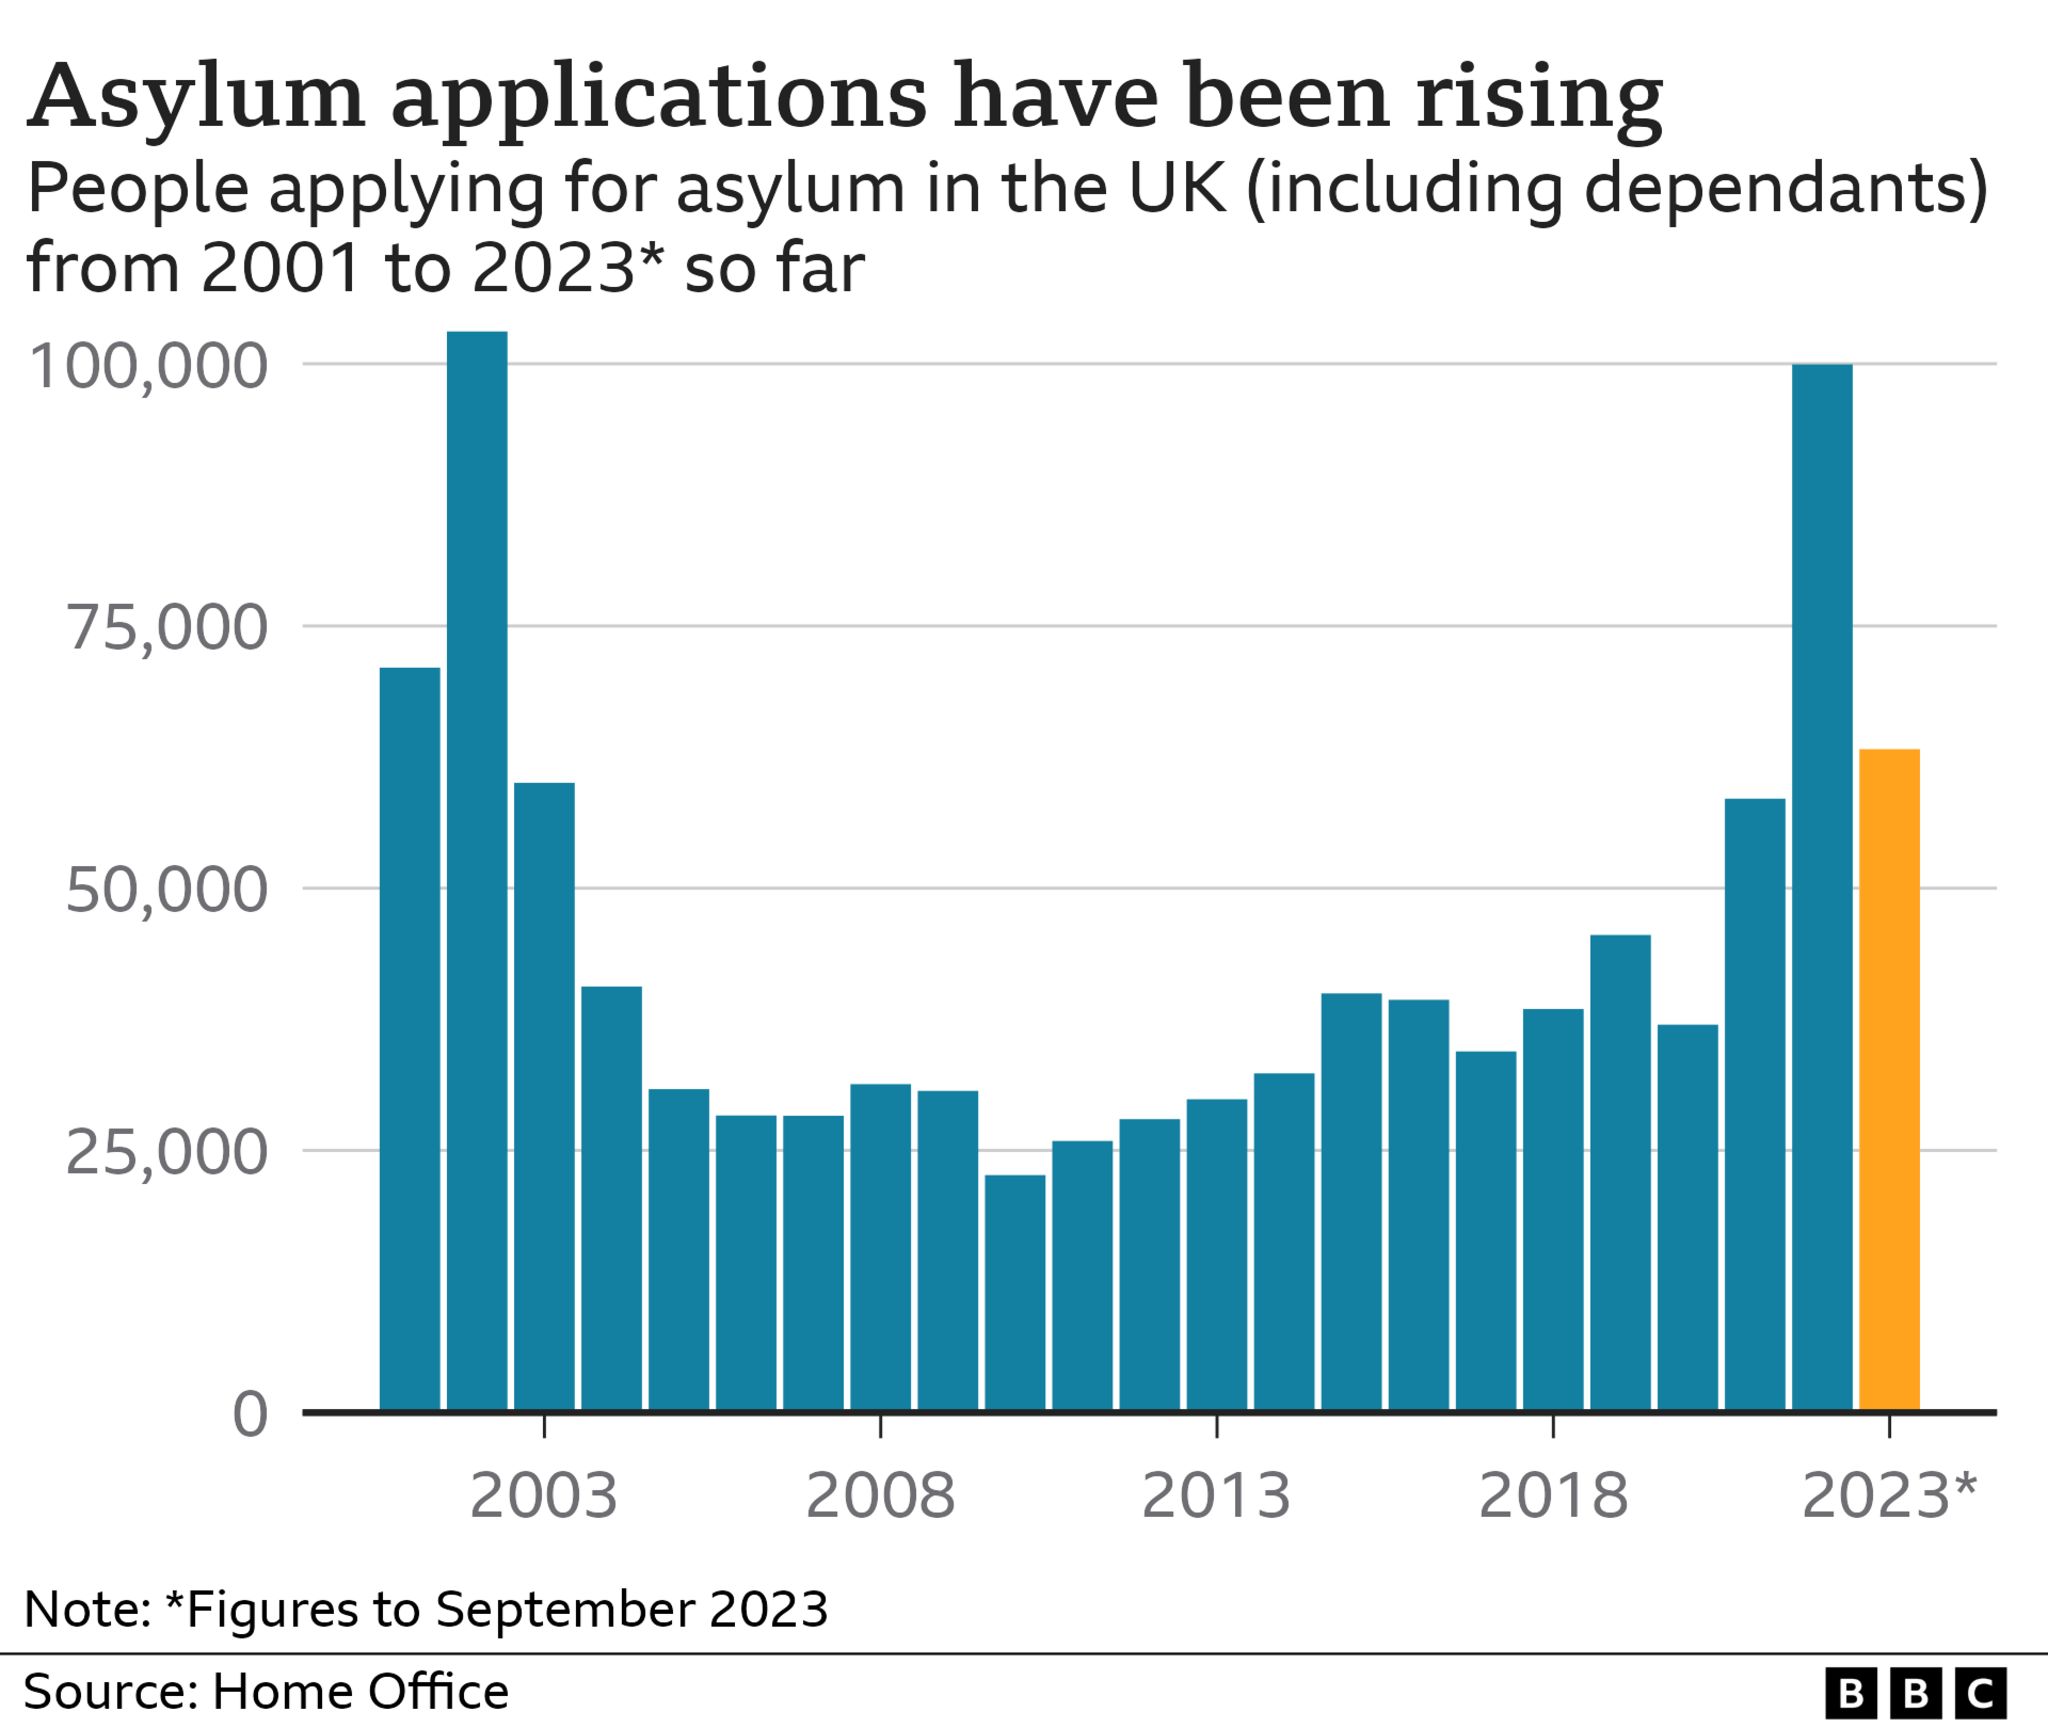 Chart showing asylum applications to the UK 2001-2023